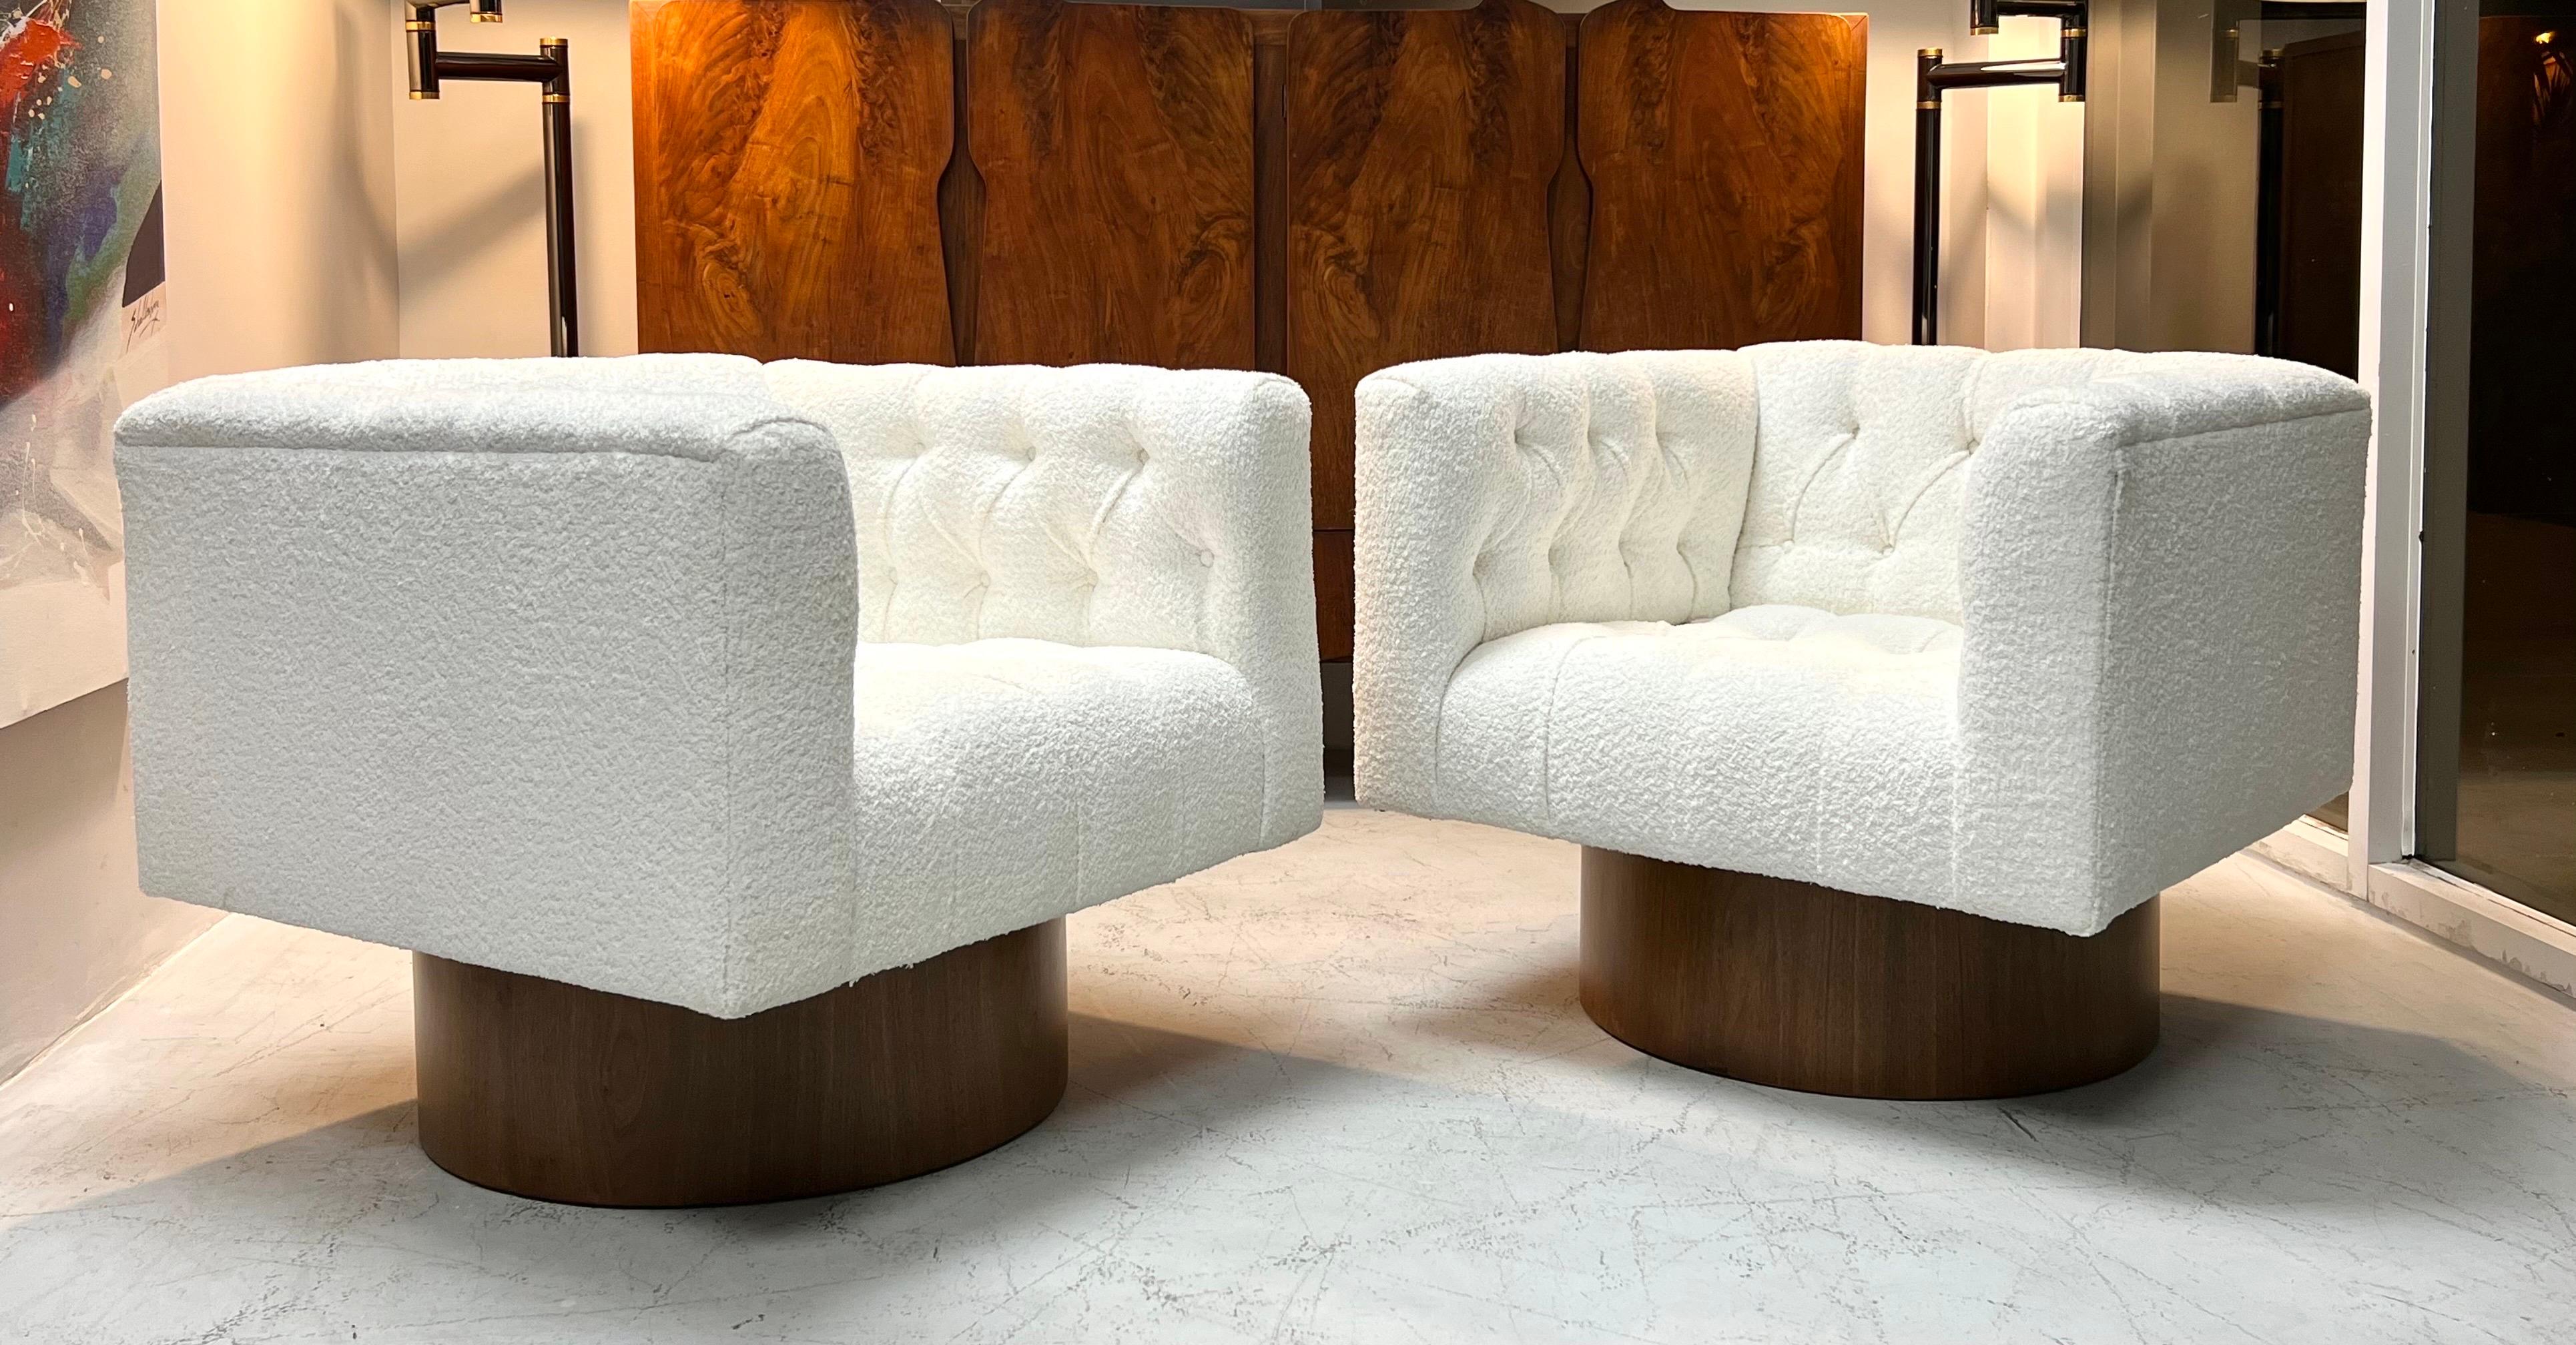 A pair of classic swivel chairs by Harvey Probber. The bases are walnut. And the upholstery is a soft boucle. The swivel is 360.